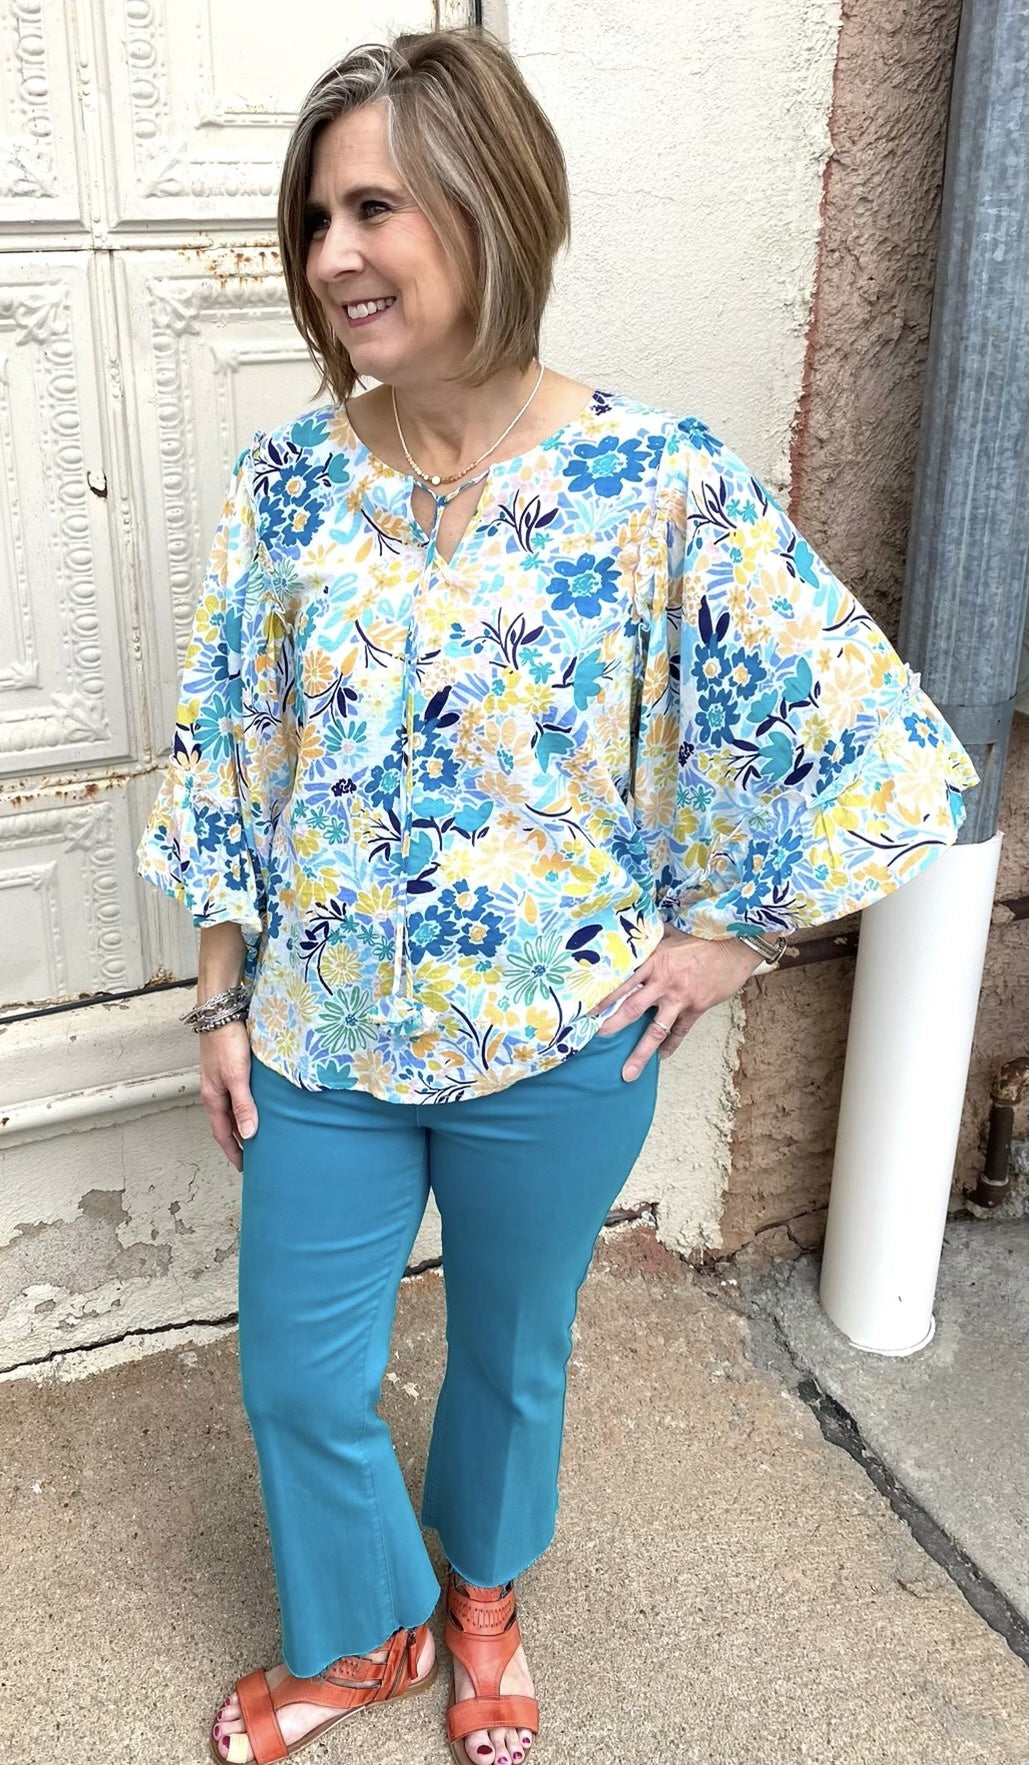 Ivy Jane Mixed In Blues Floral Wide Ruffled Slv Top w Ties